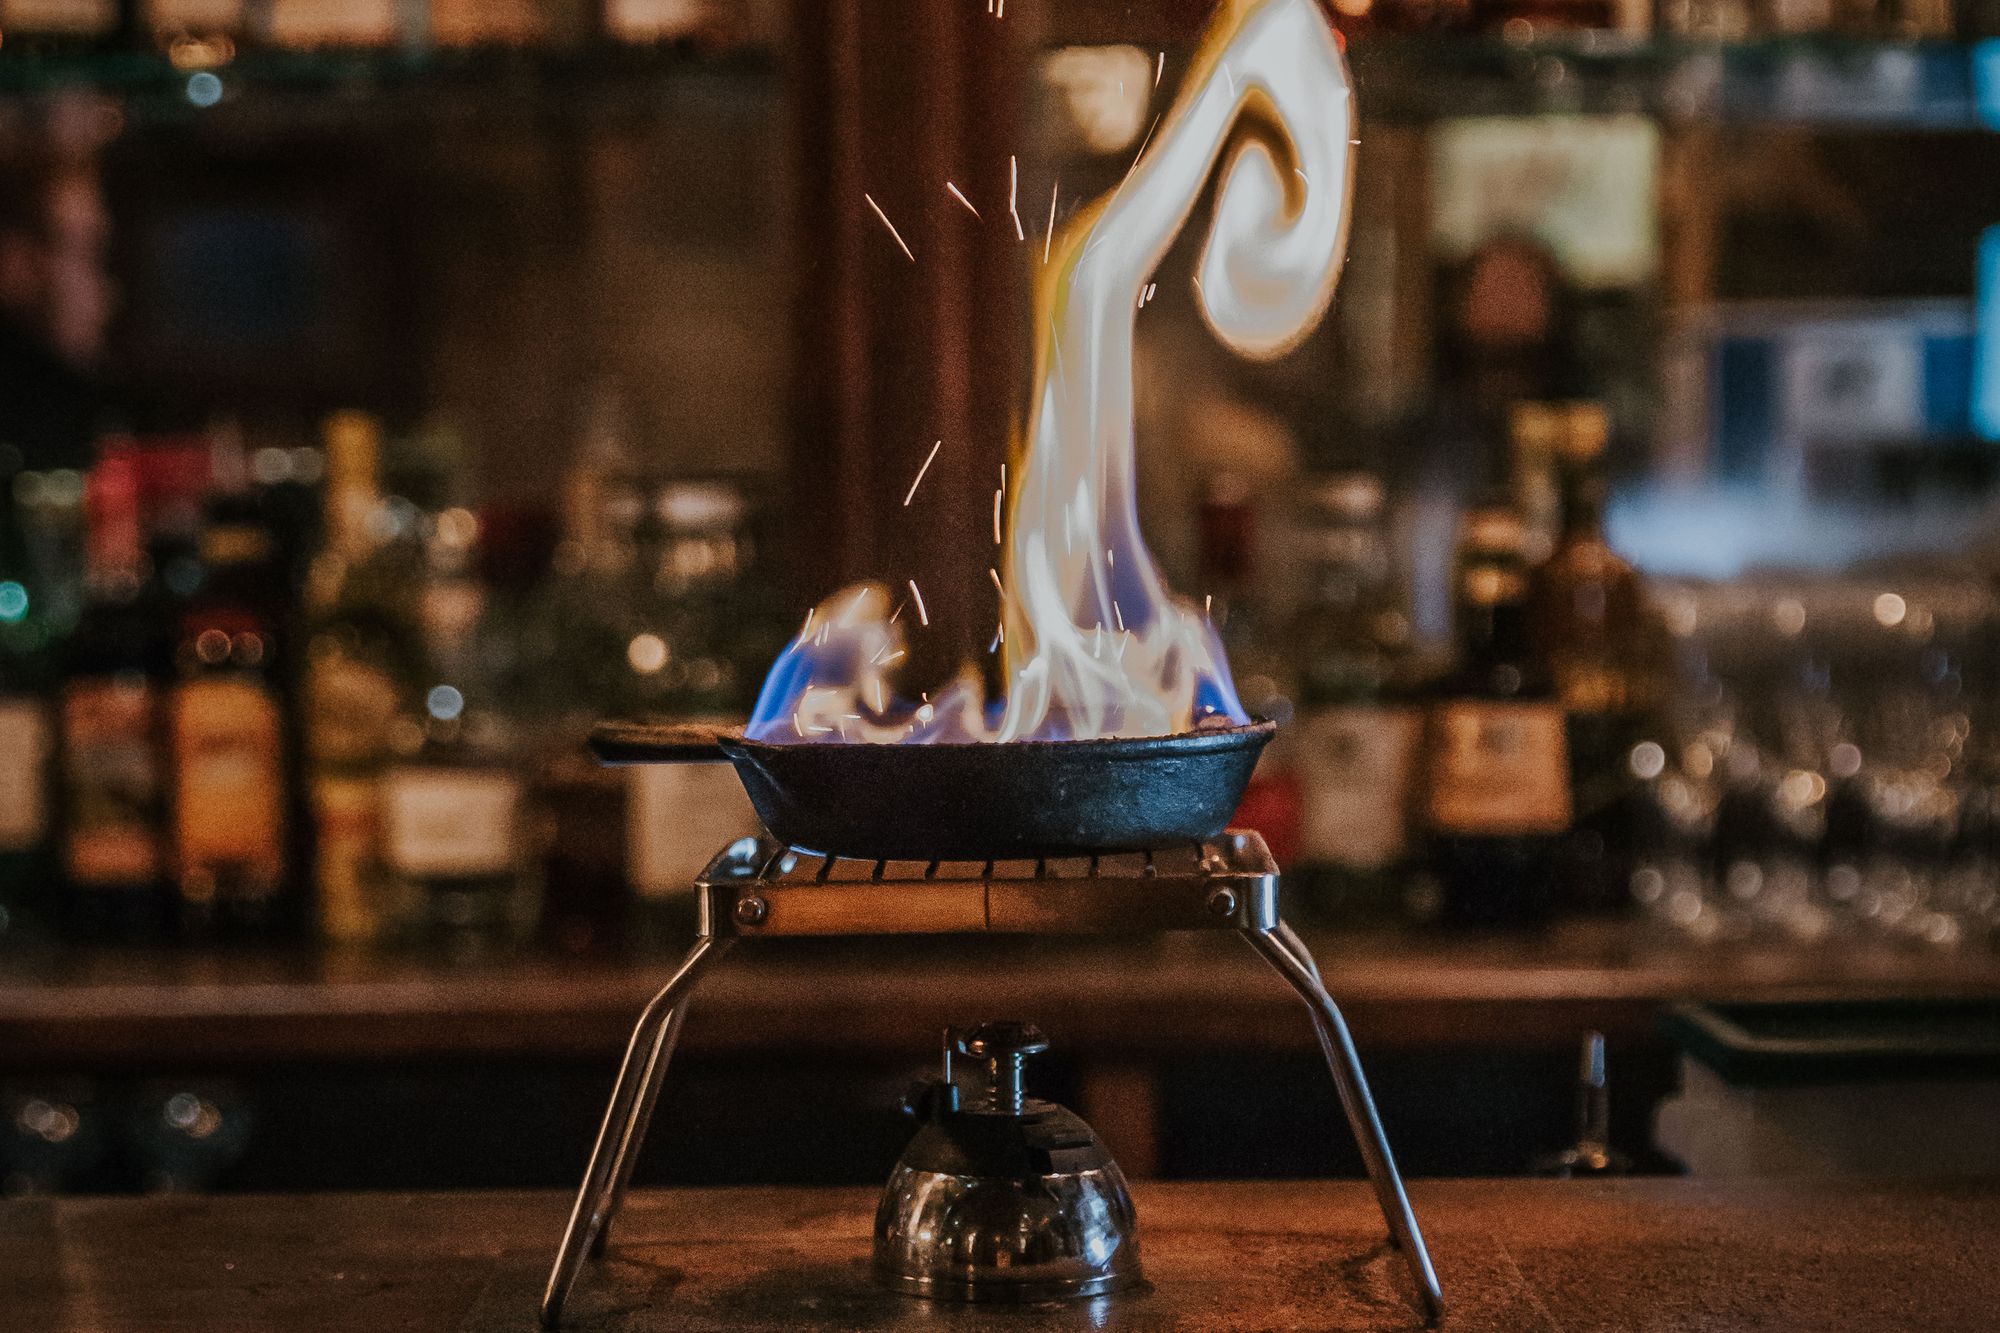 A fantasy-themed bar brings the magic of chemistry to life